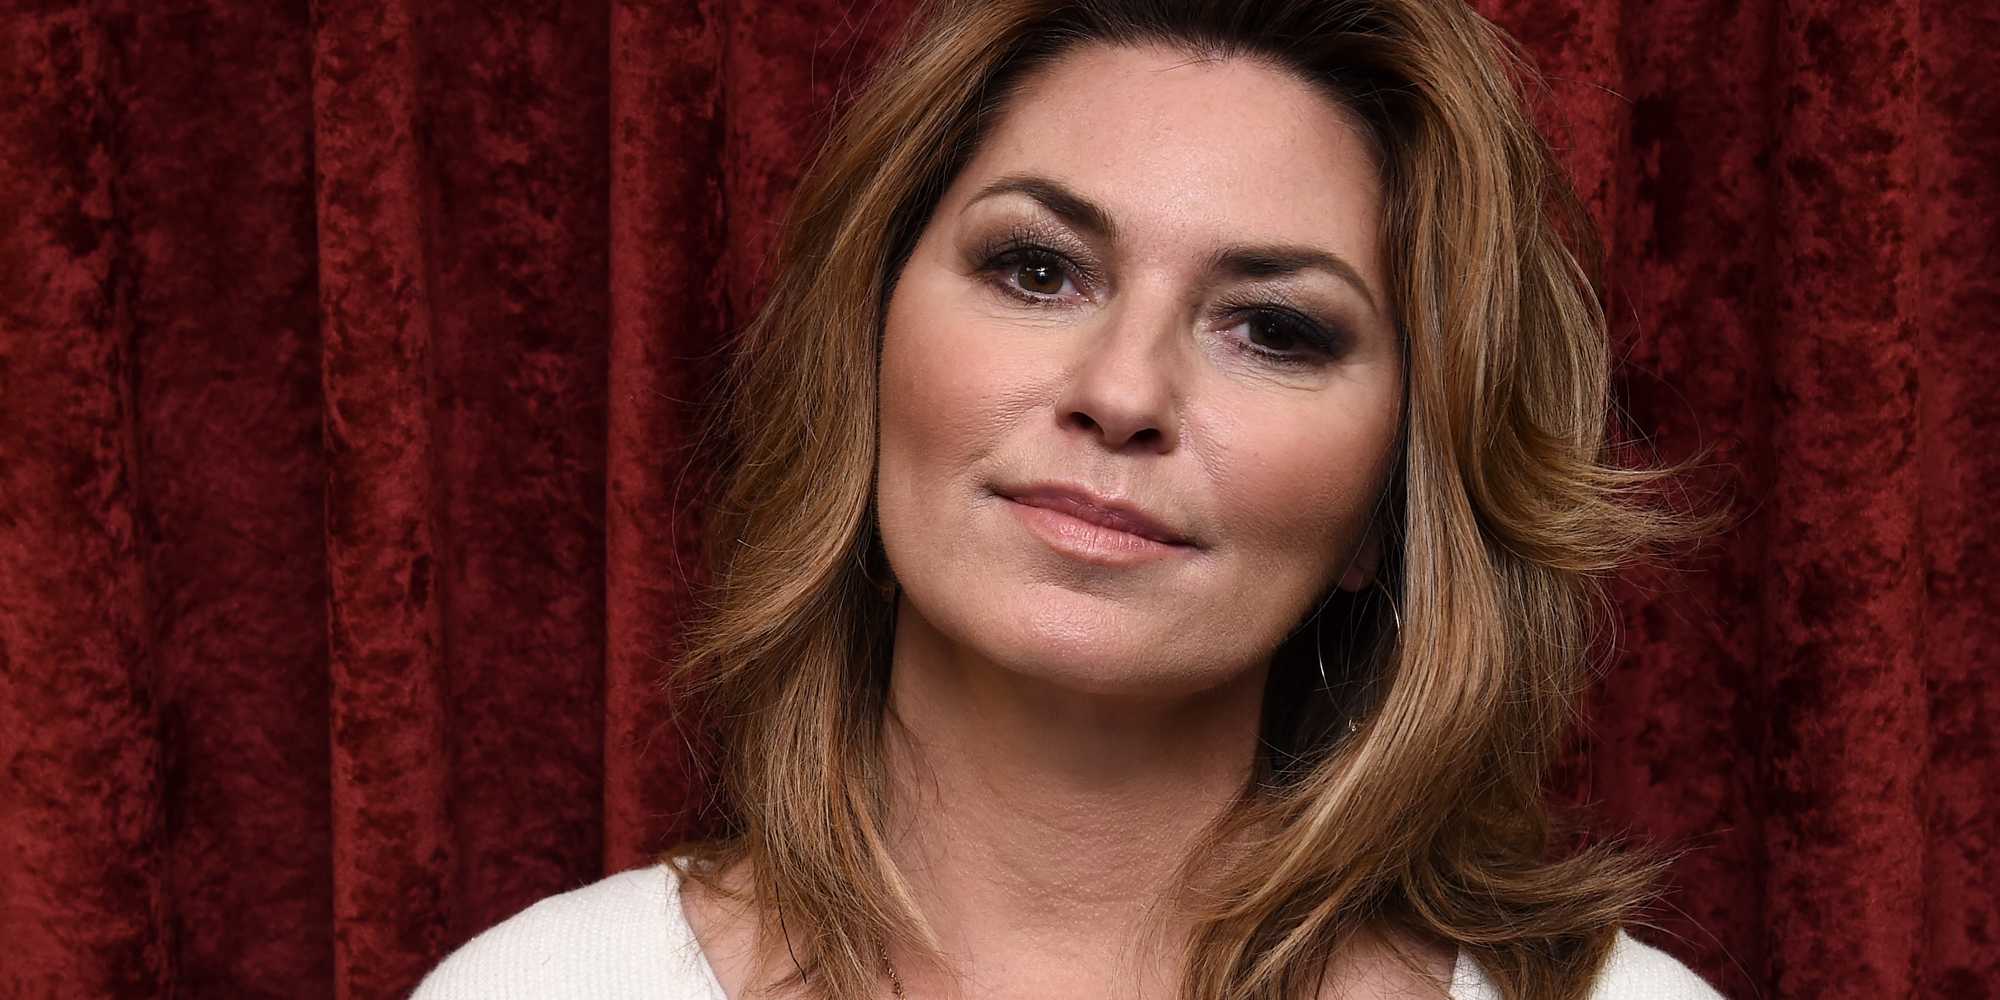 The truth about why Shania Twain stopped singing for 15 years